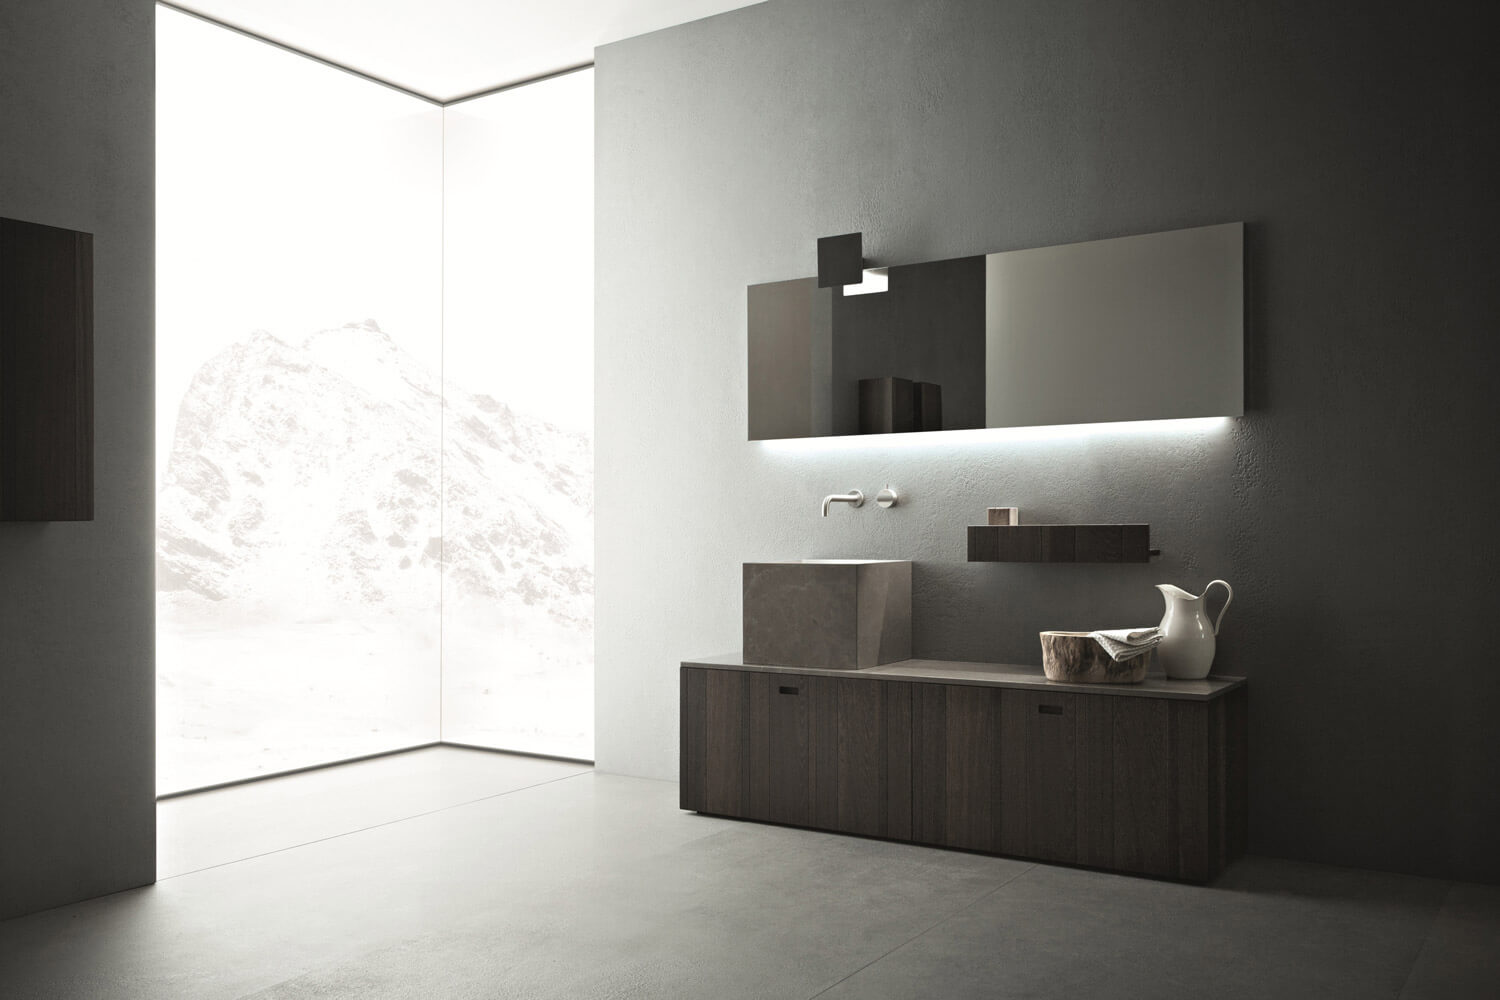 Wood and stone come together in another modern bathroom design.